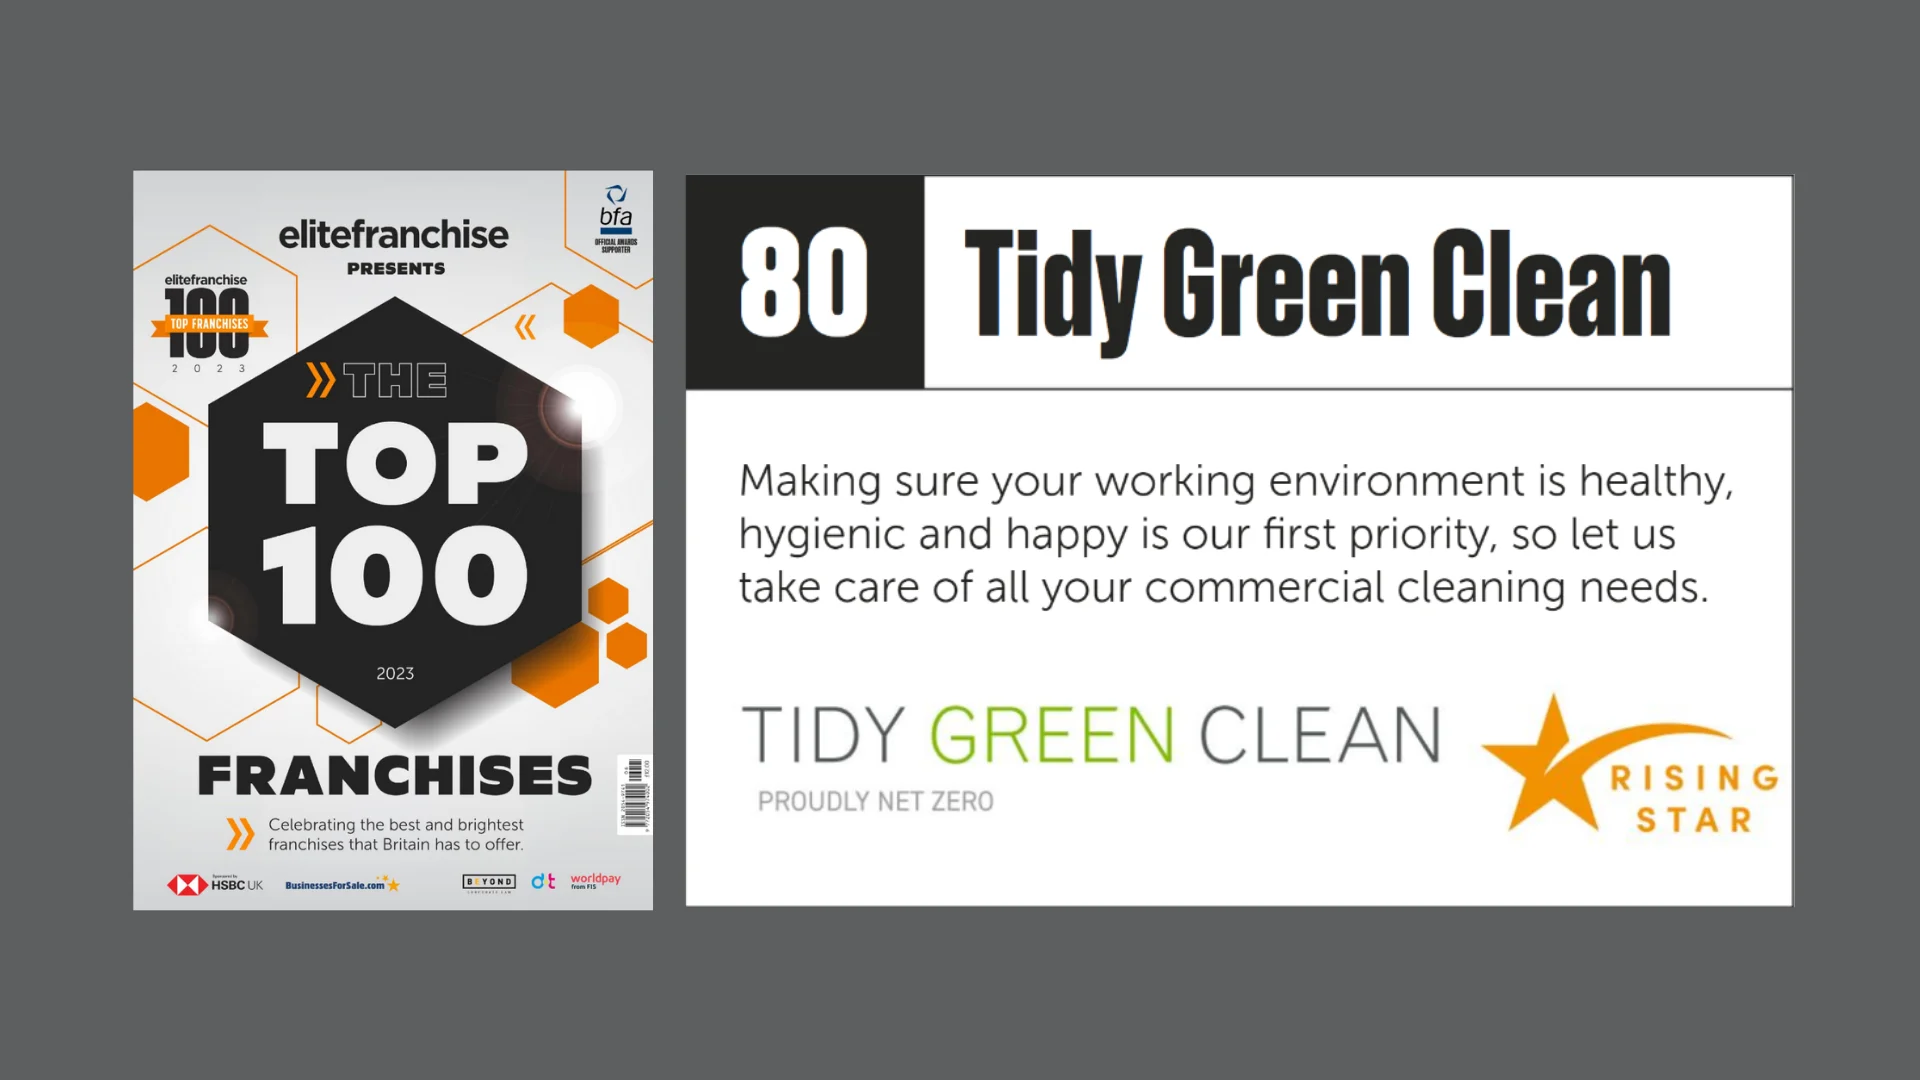 the top 100 franchise of tidy green clean